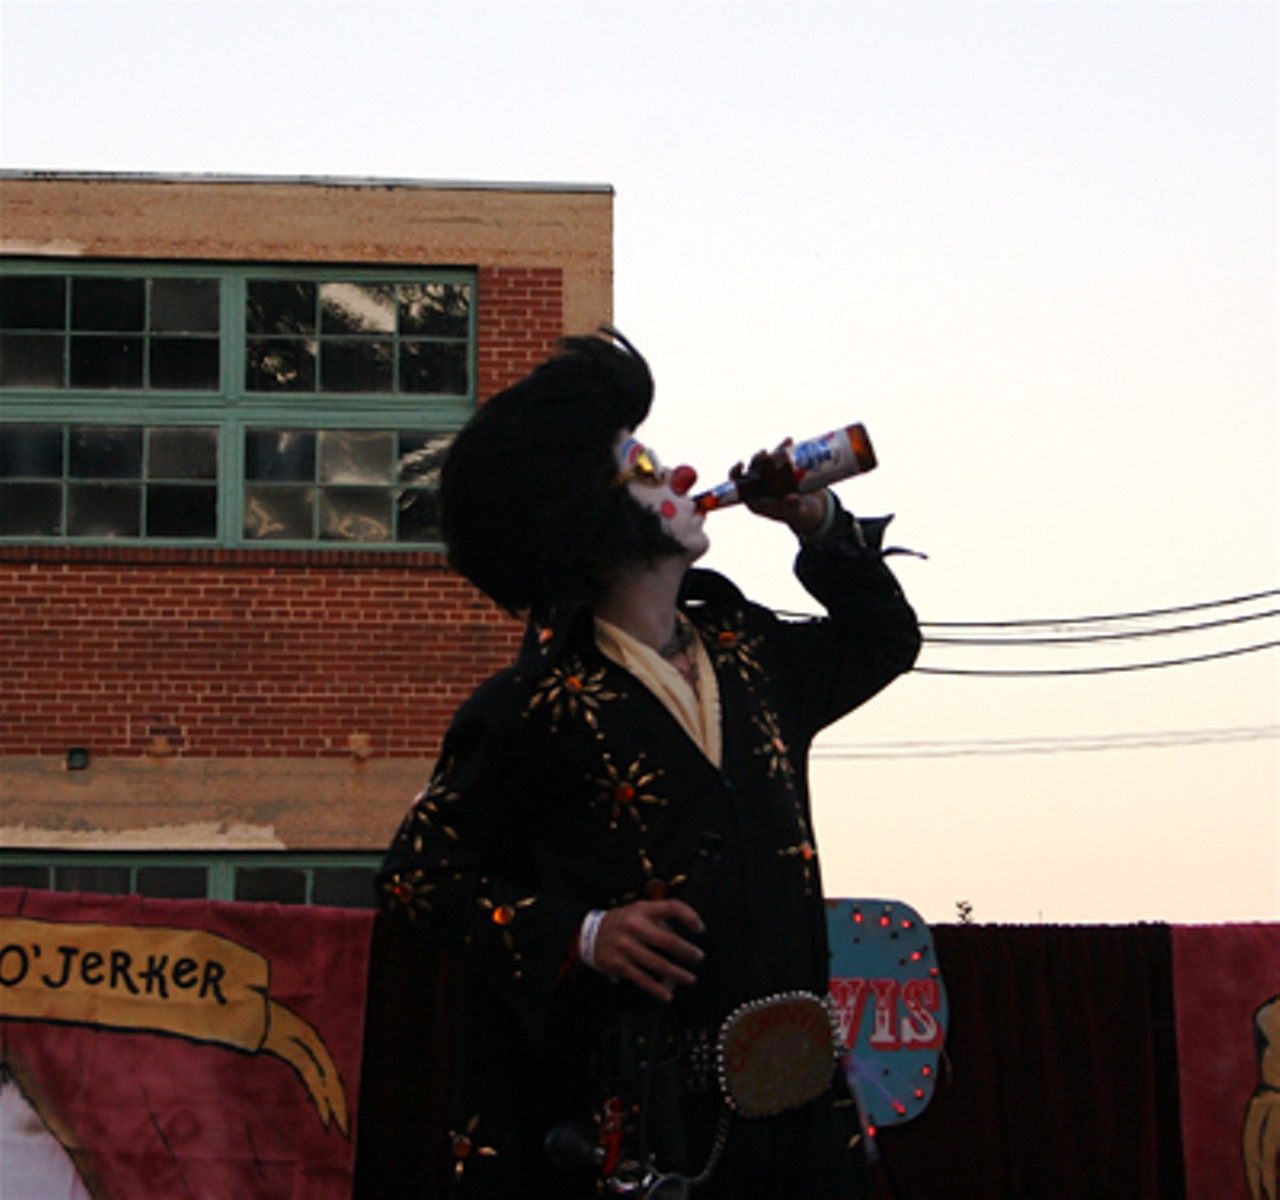 Clownvis -- the party's MC -- gets down with a cool one after giving a PBR PSA.